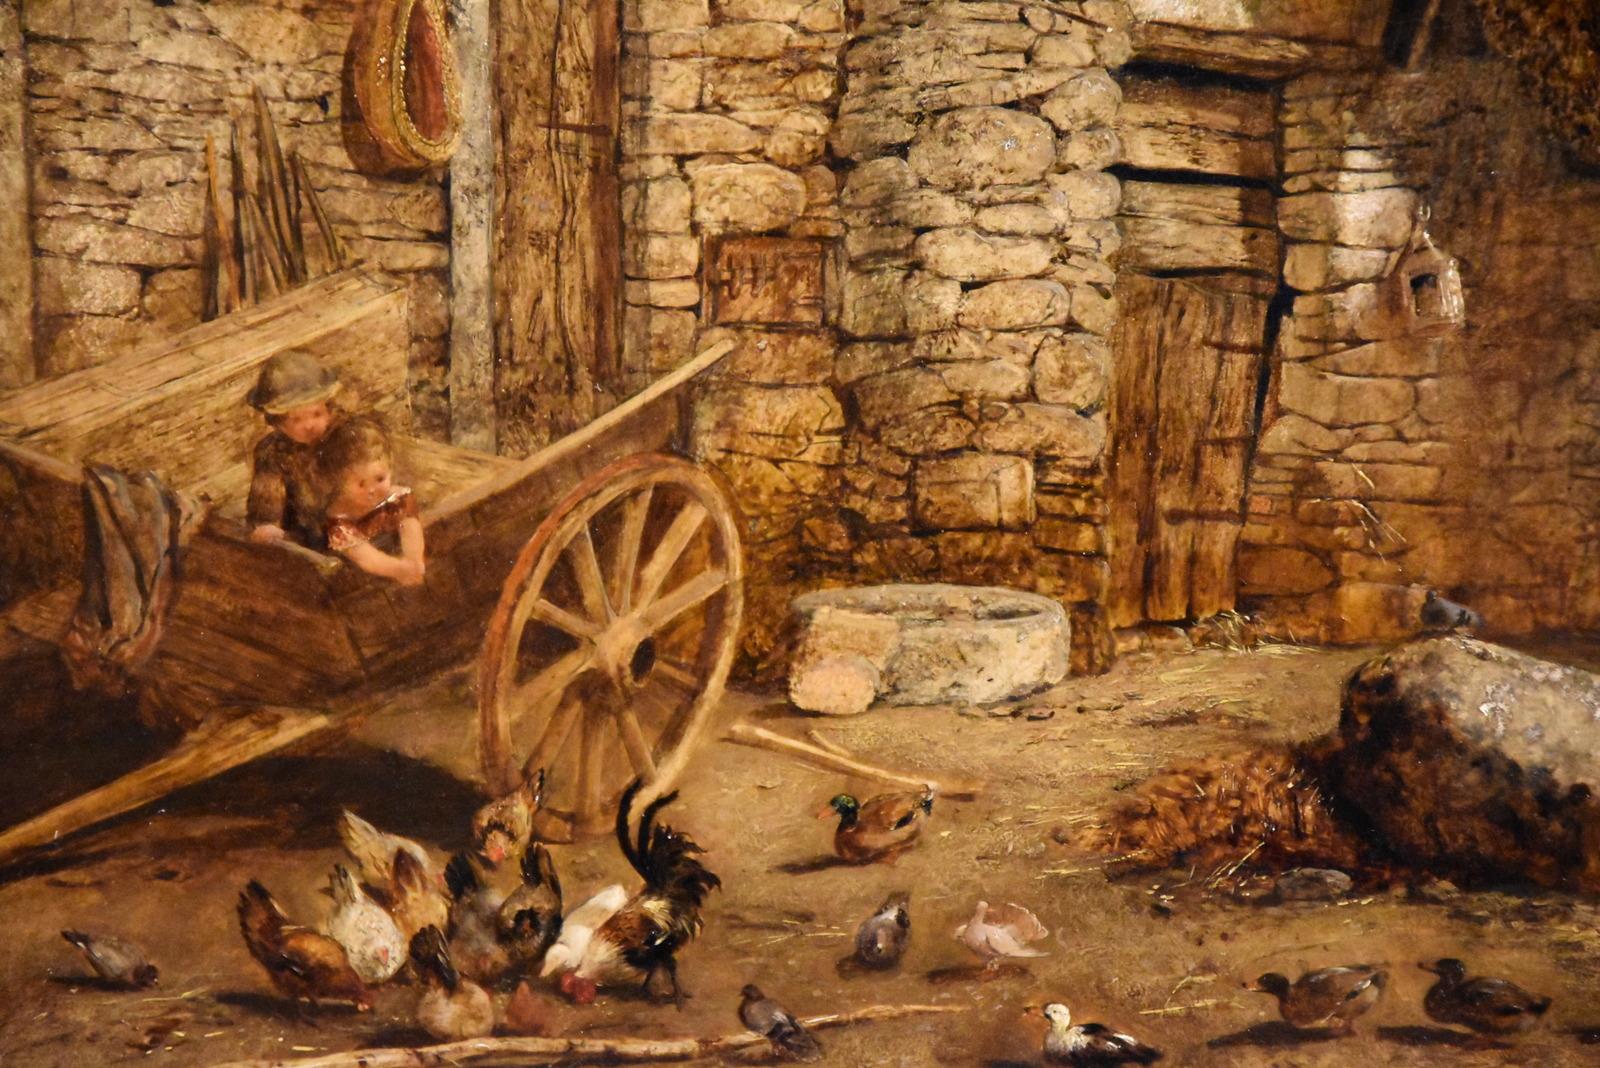 Oil Painting by John Henry Dell “Feeding the chickens” Rural Victorian 2